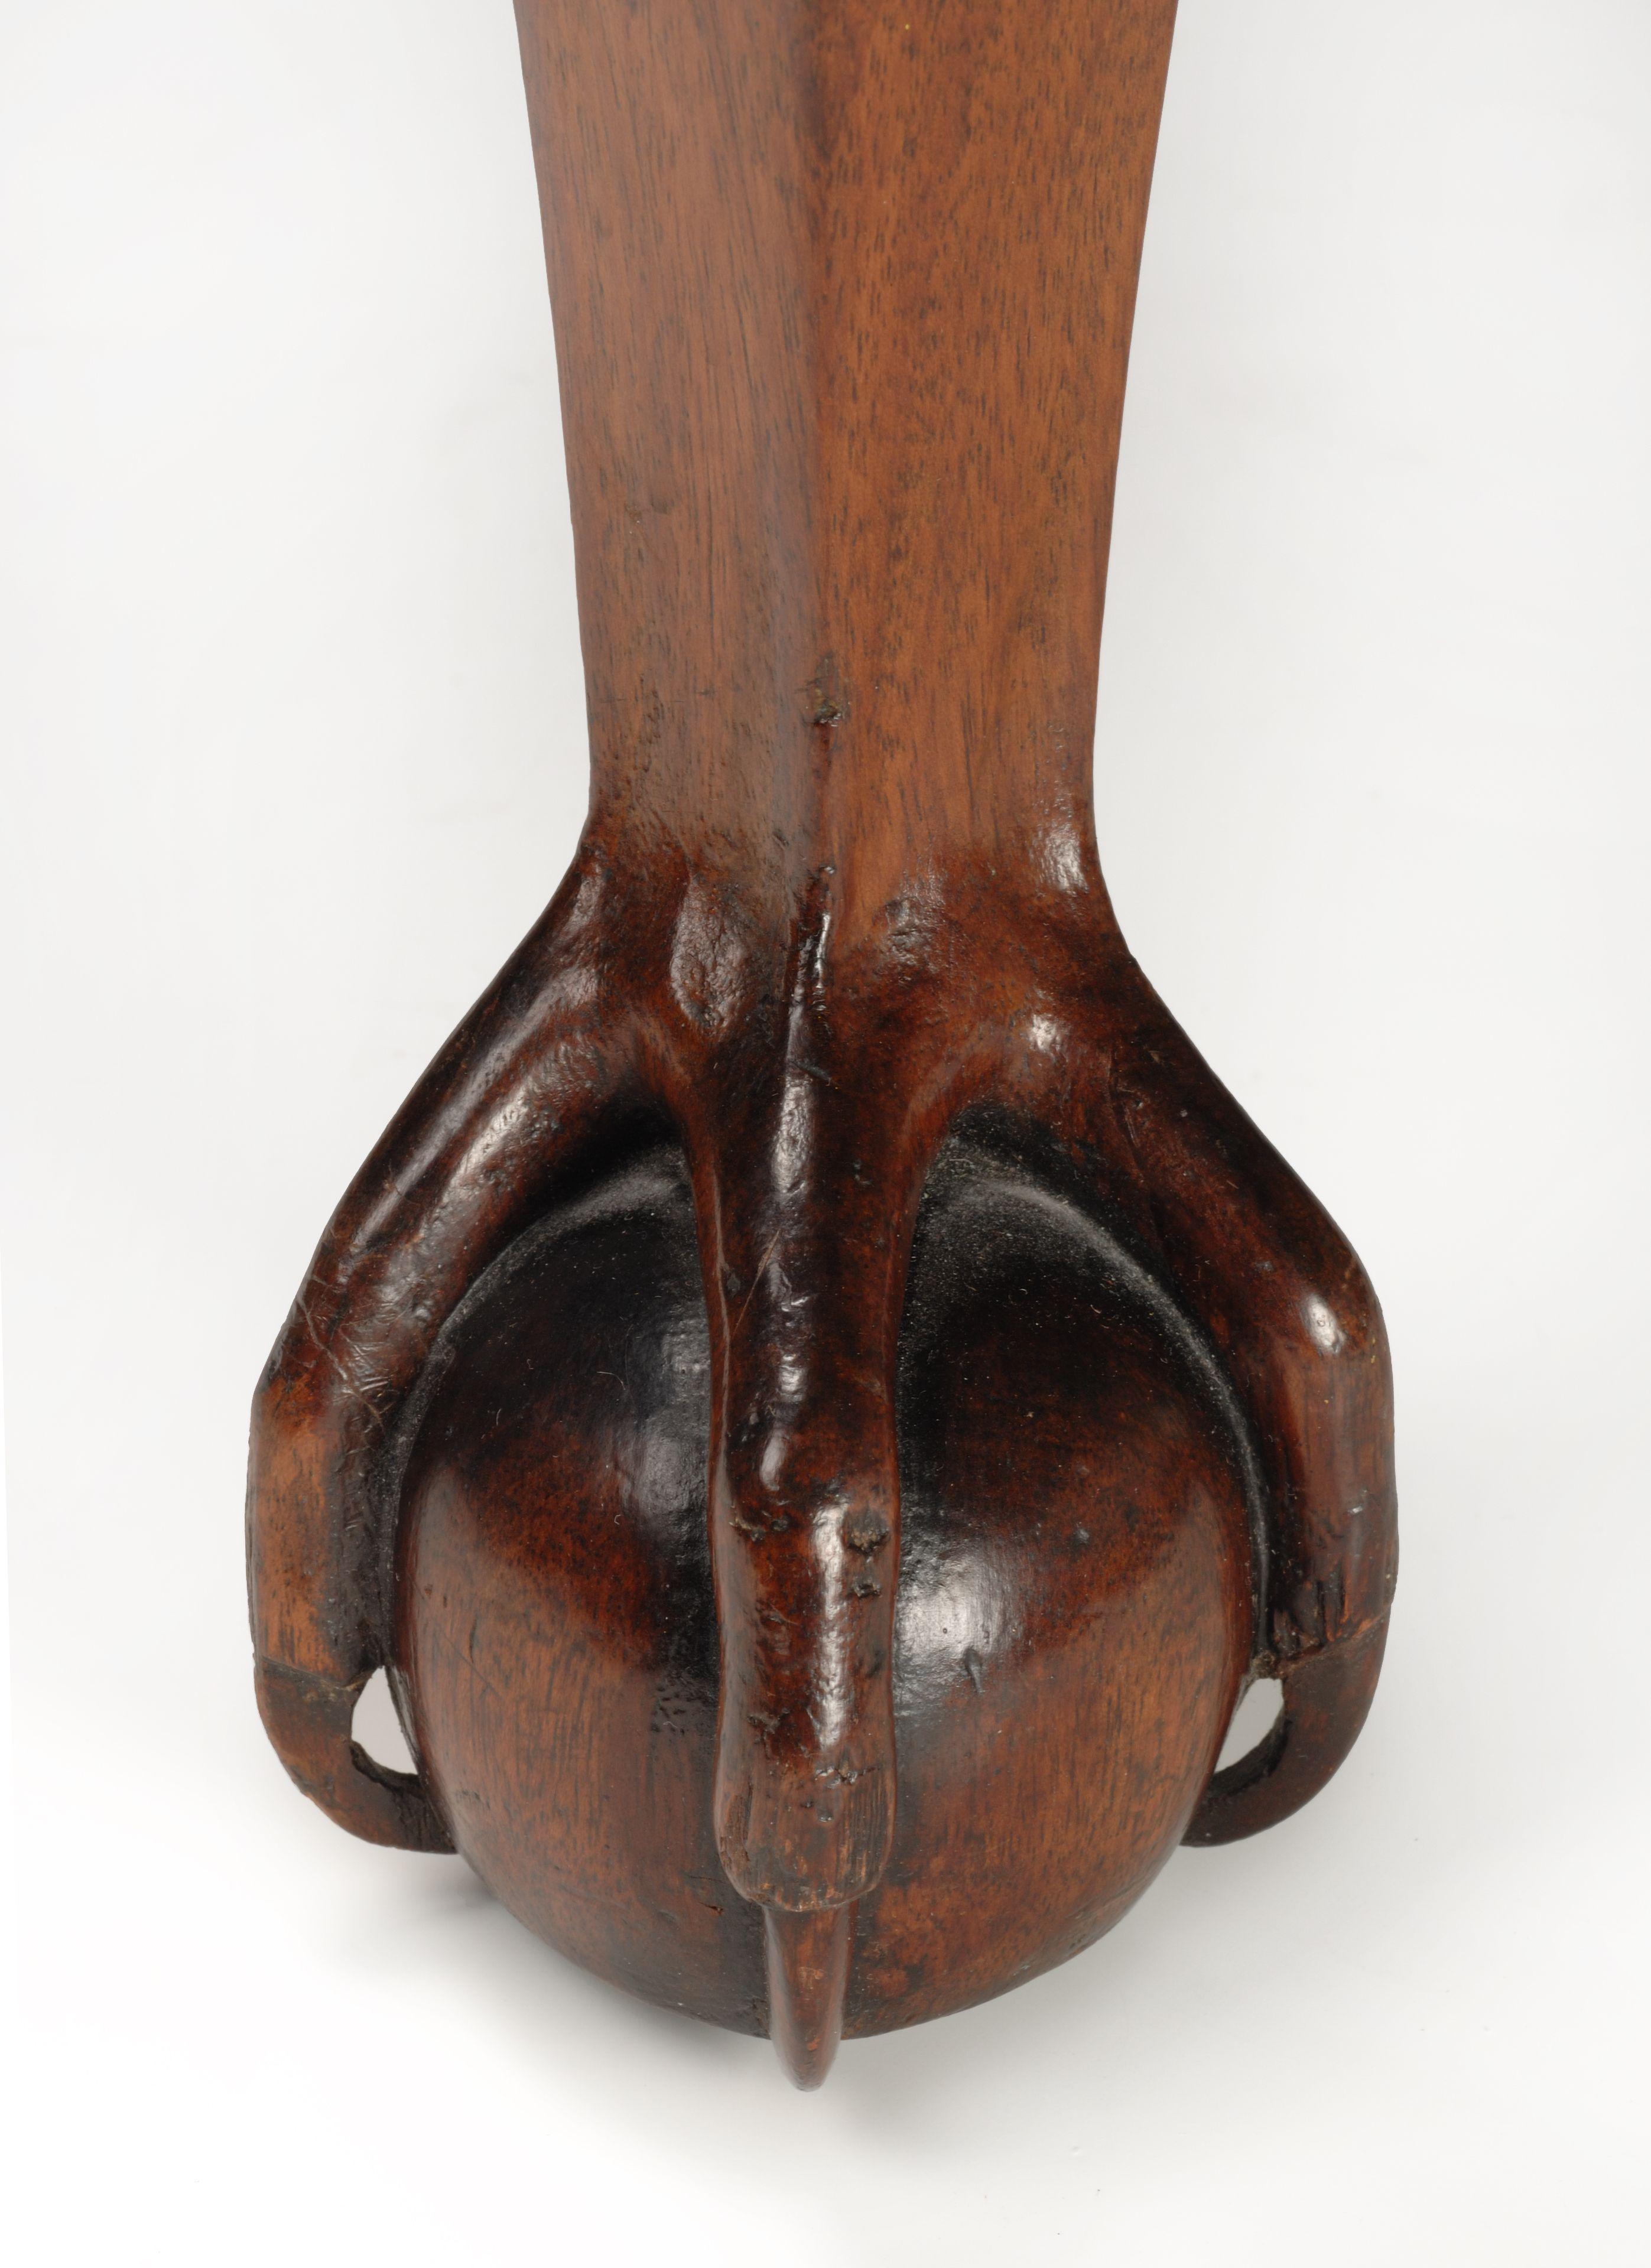 The Ball And Claw Foot Is A Distinctive Feature Of Newport throughout Claw Feet For Furniture